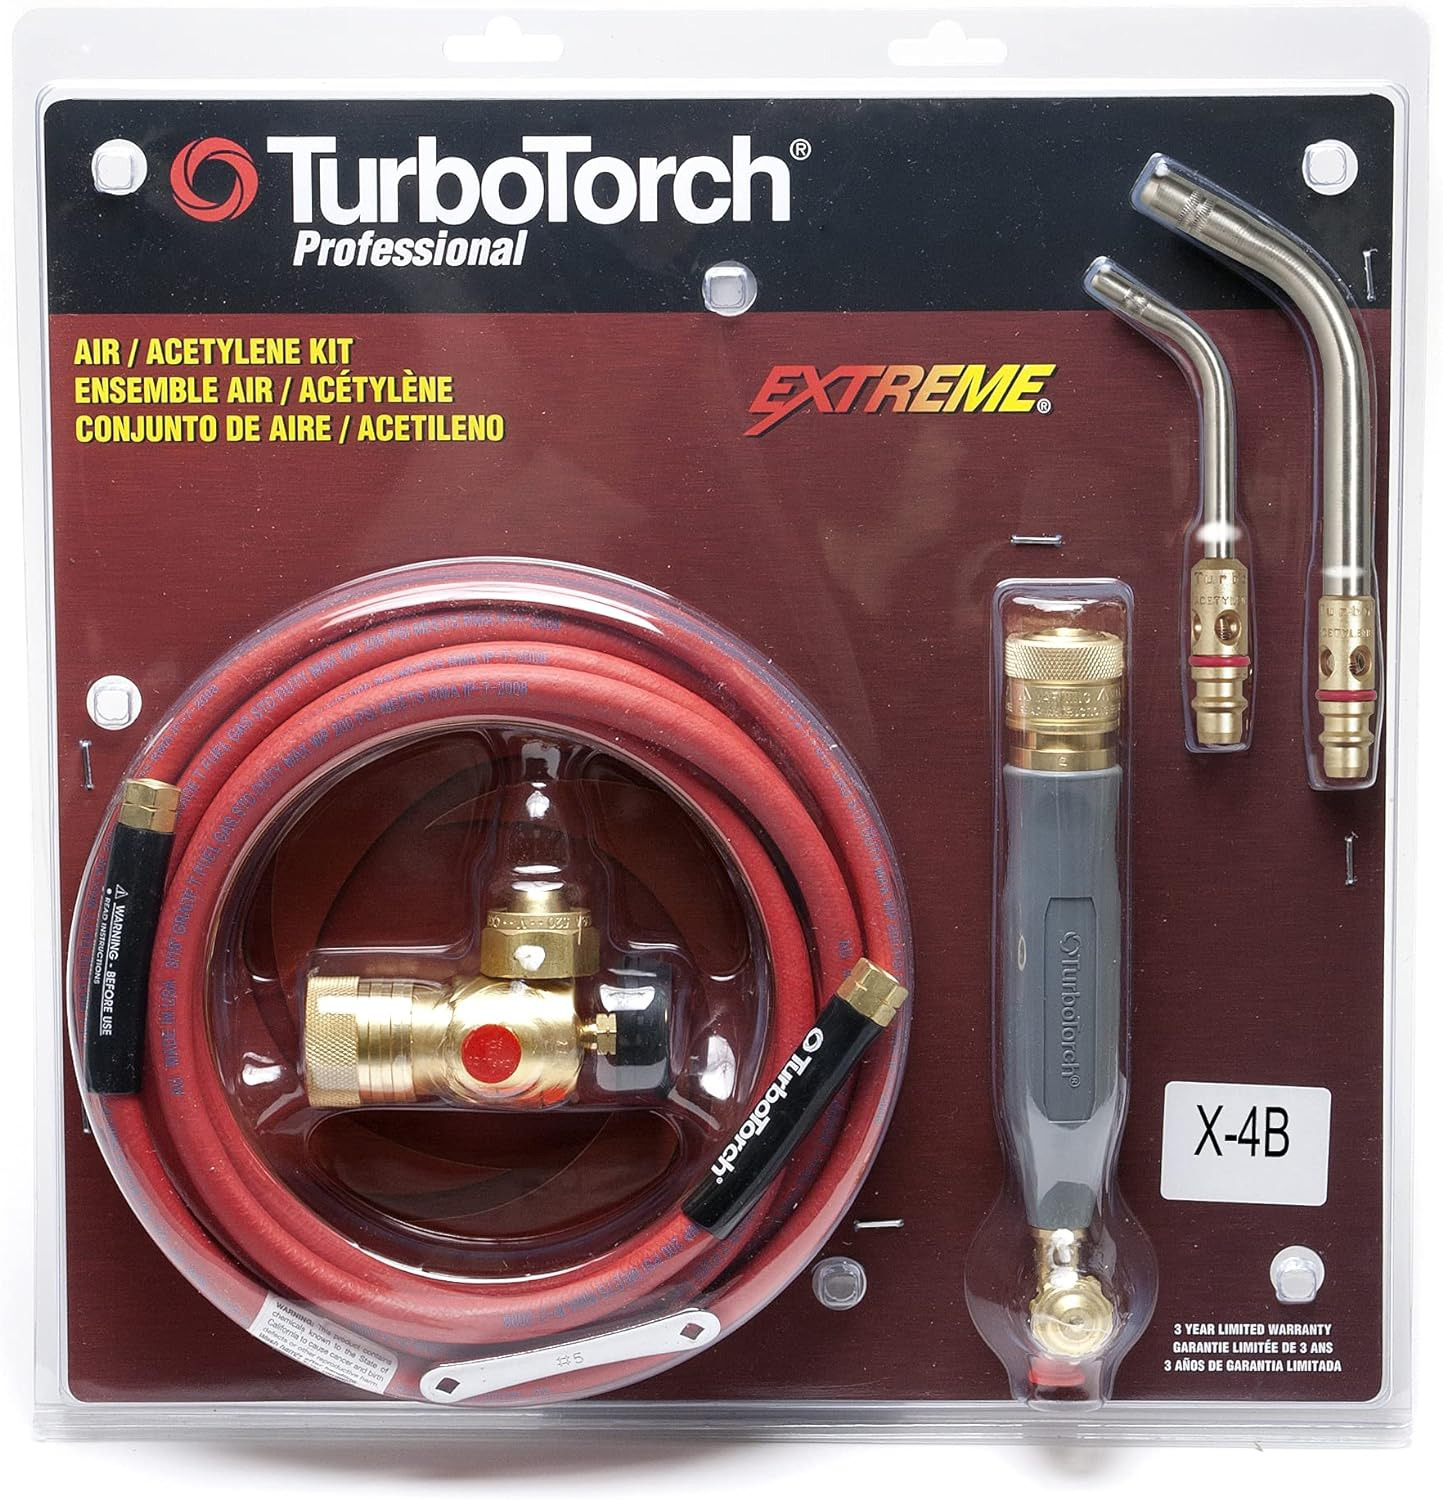 TURBOTORCH 0386-0336 X-4B Manual Torch Kit, Air Acetylene, EXTREME Swirl Combust